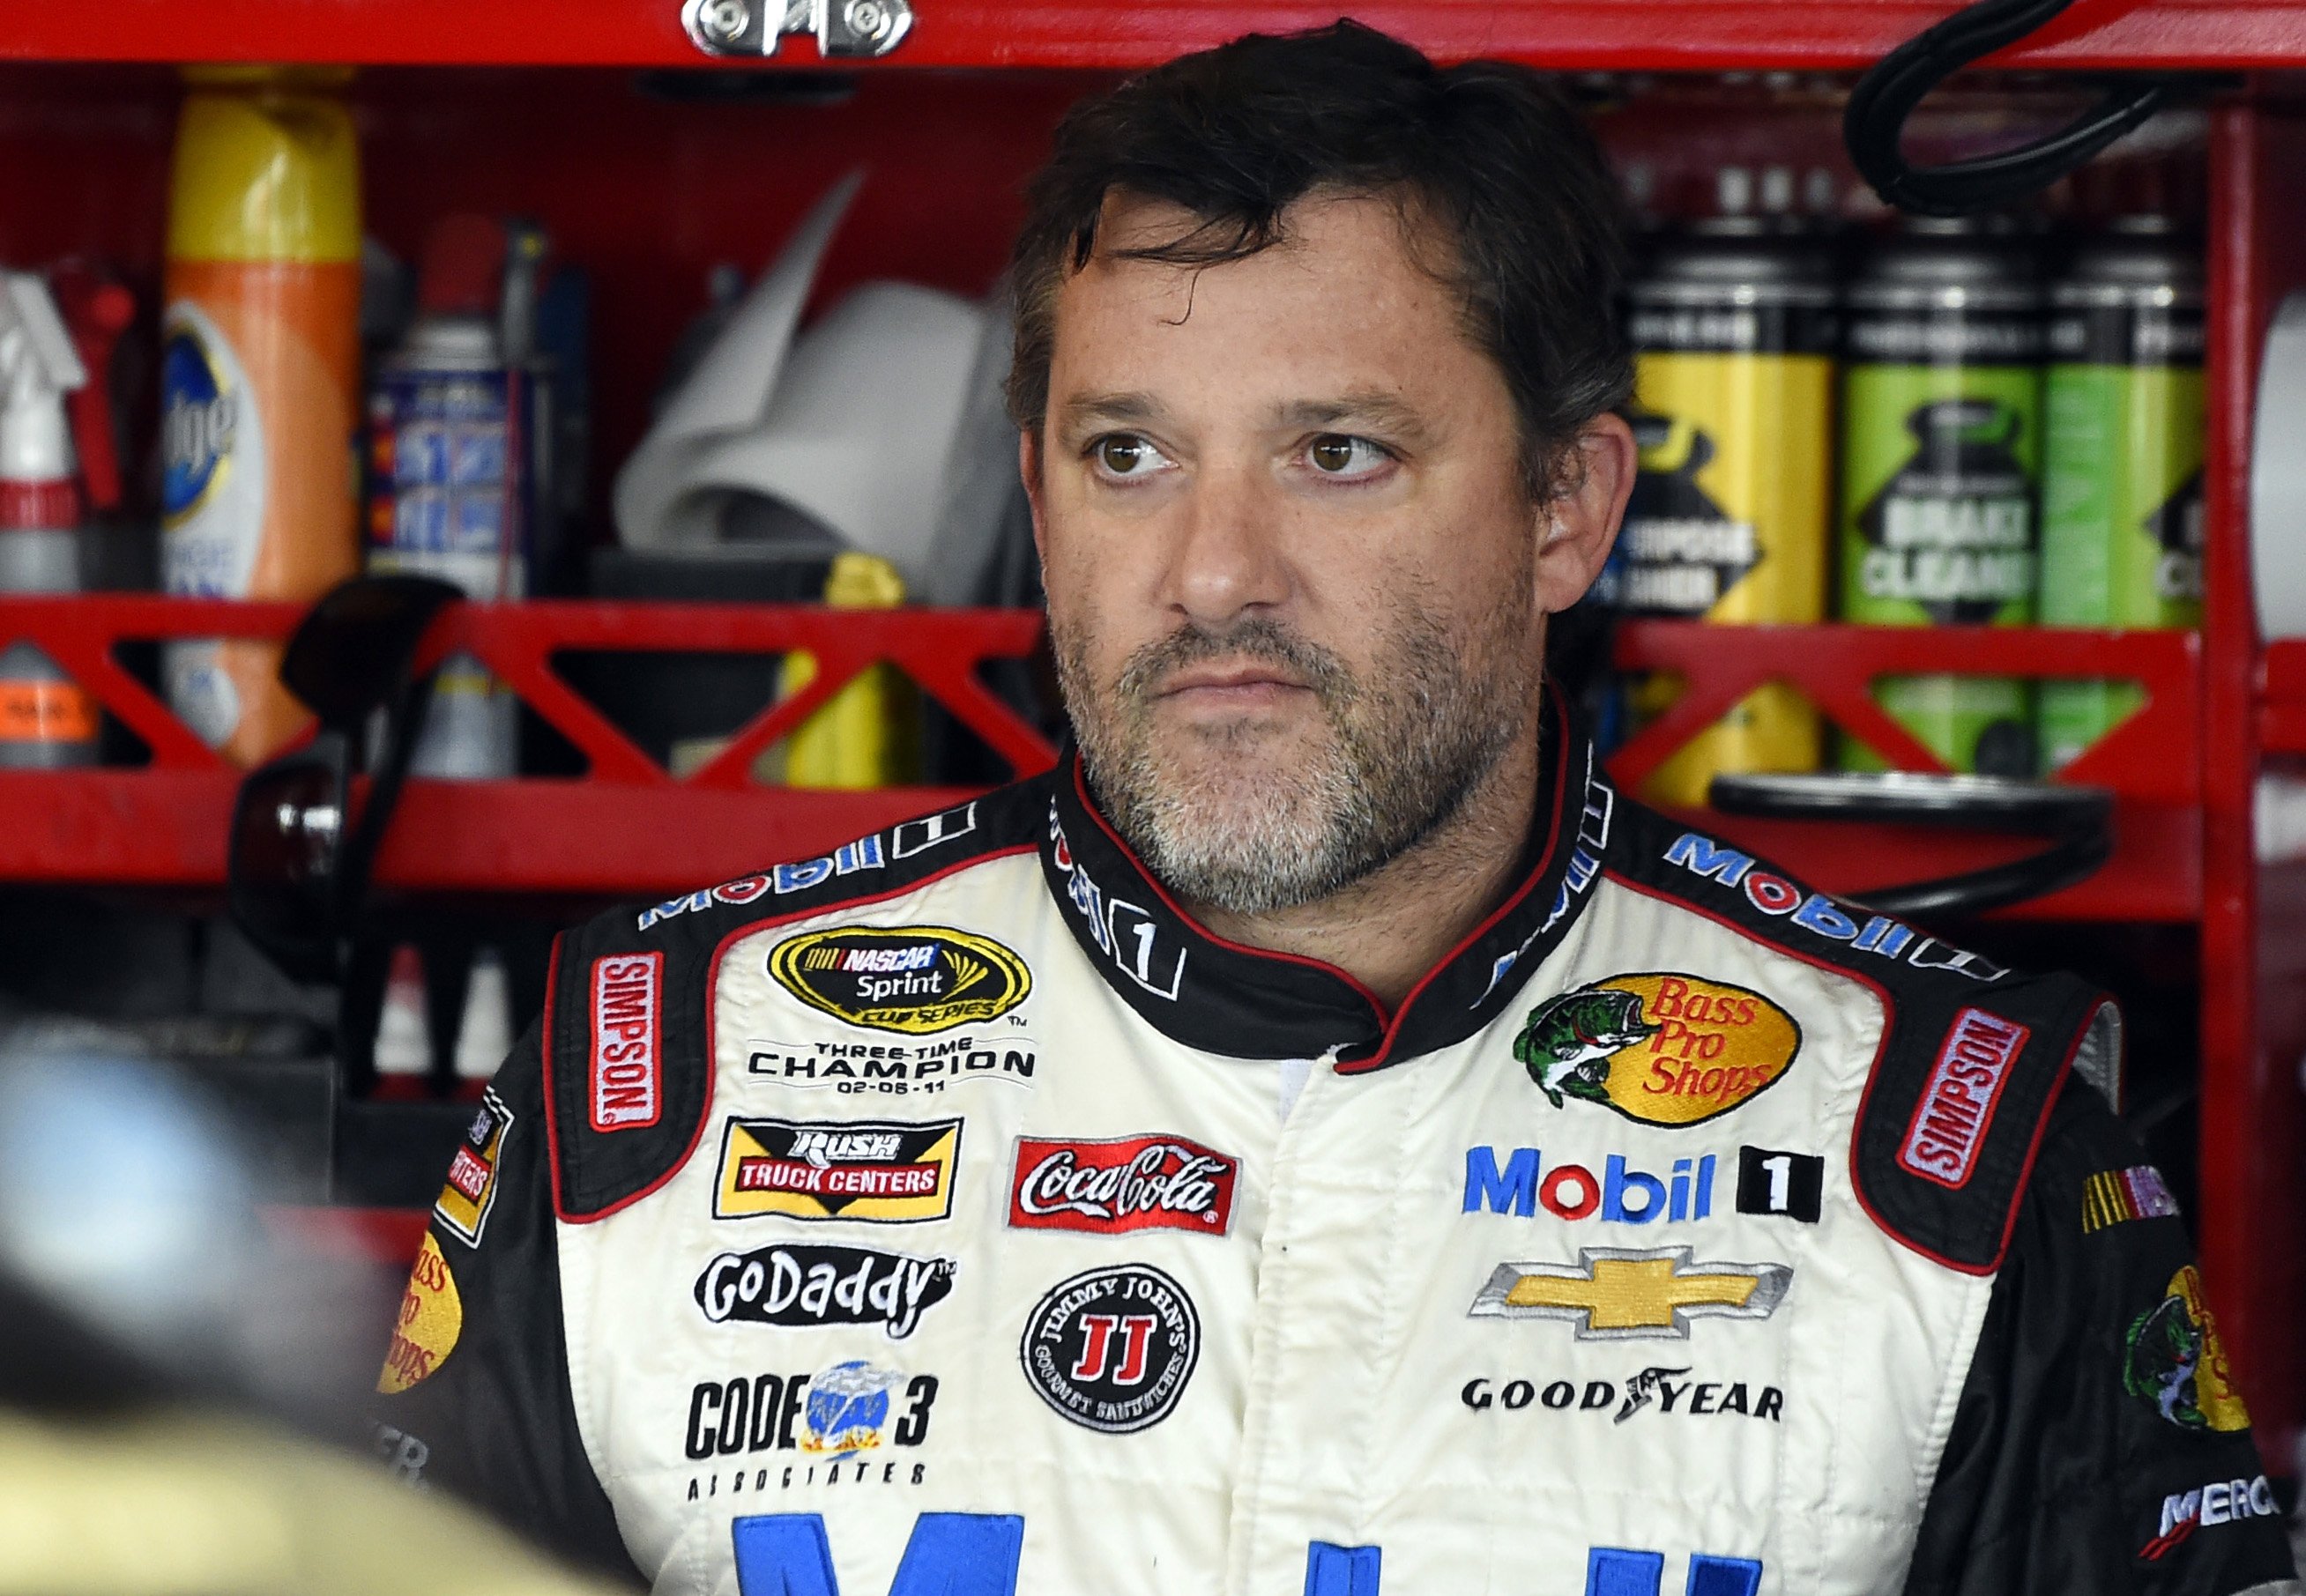 NASCAR driver Tony Stewart (14) looks out from his garage during a practice for the NASCAR Sprint Cup Series auto race at Chicagoland Speedway in Joliet, Ill. on Sept. 13, 2014. (Paul J. Bergstrom—AP)